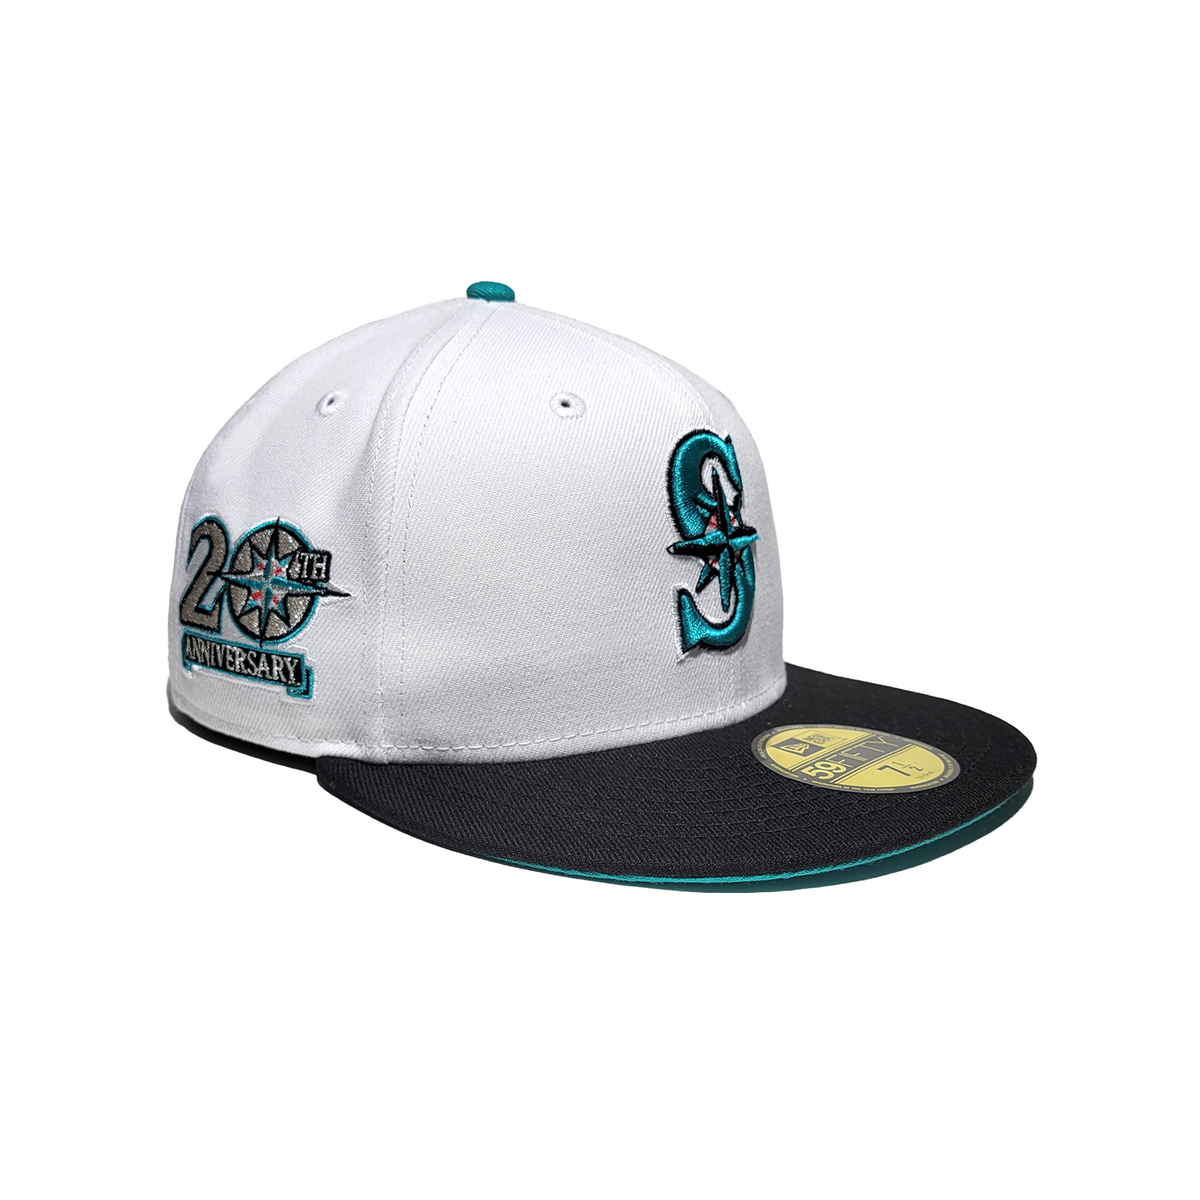 SEATTLE MARINERS (TEAL) (20TH ANNIVERSARY) NEW ERA 59FIFTY FITTED